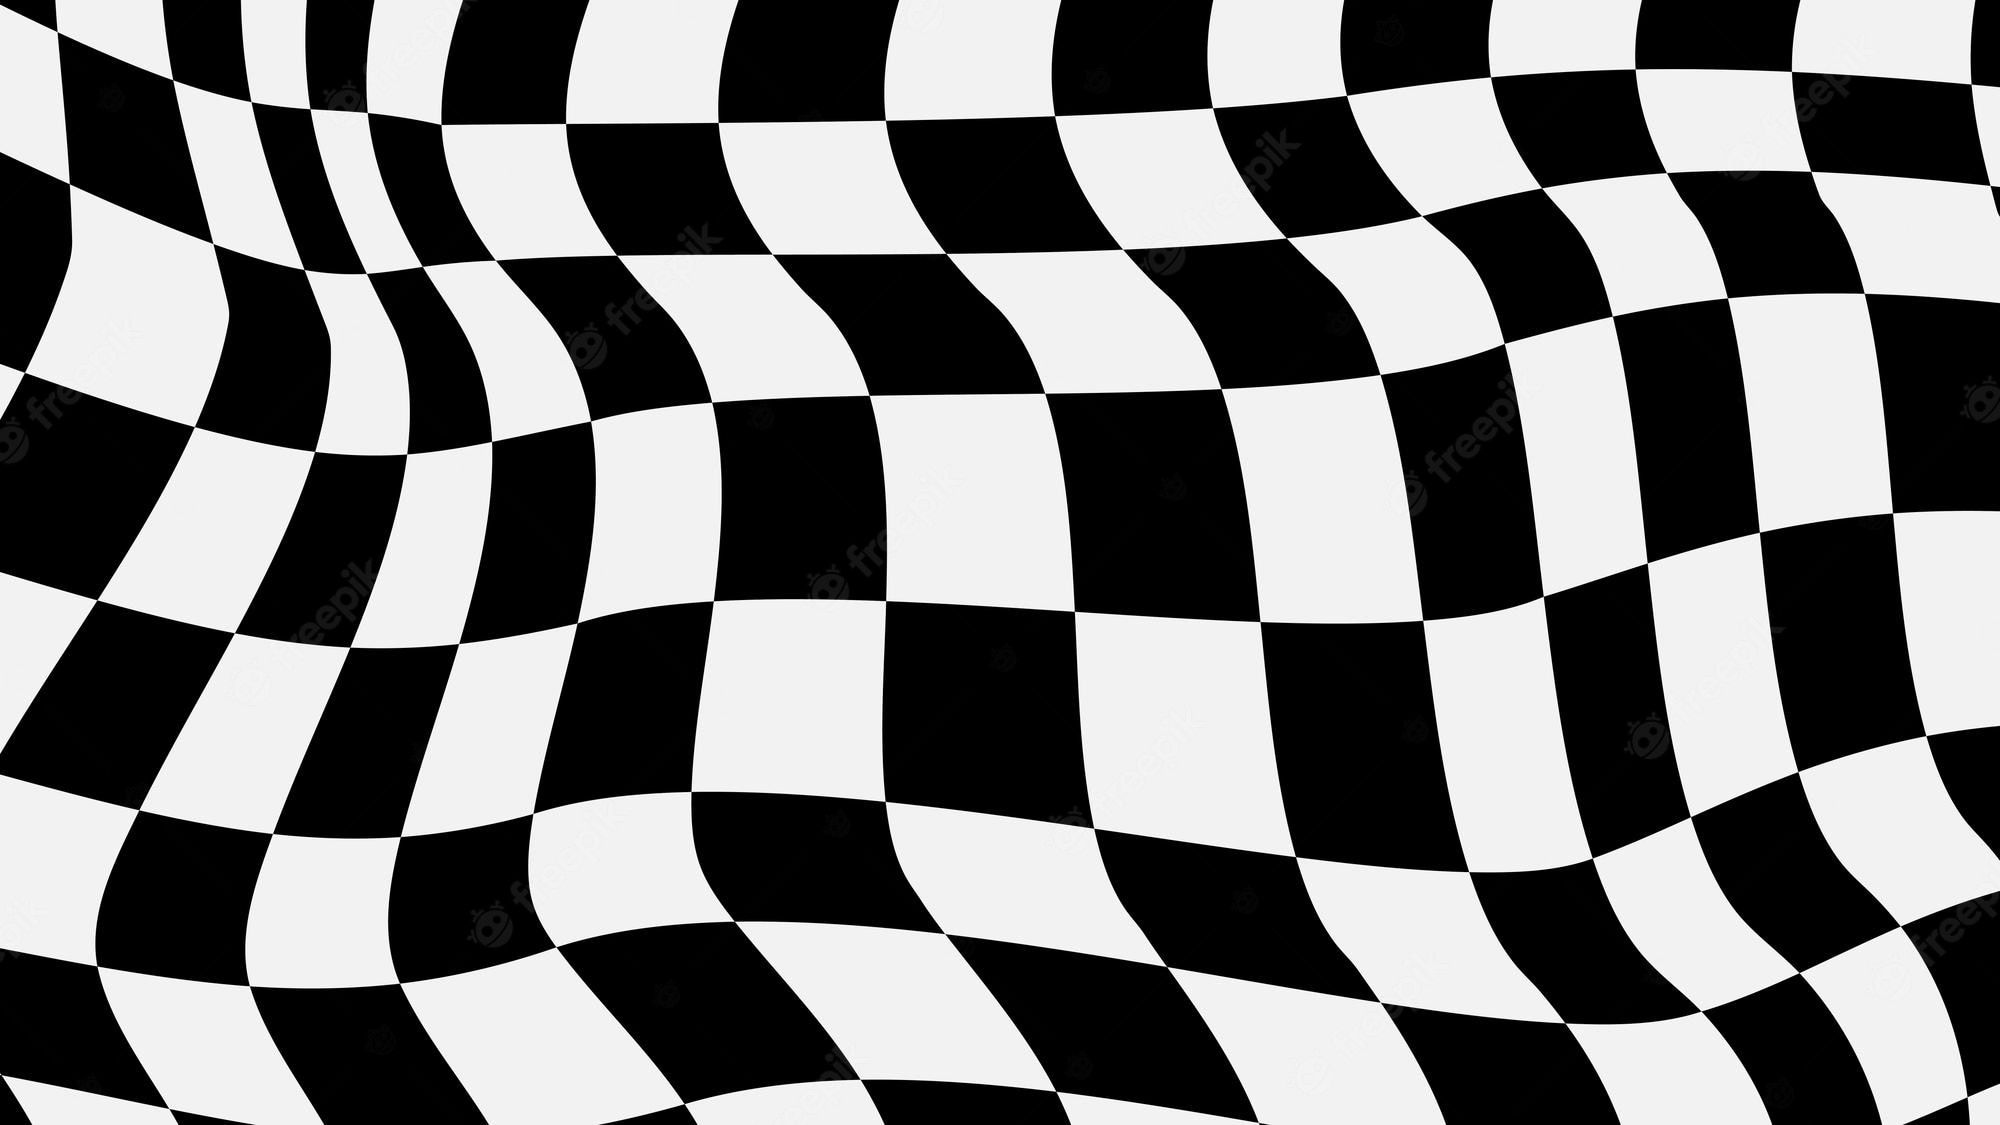 A black and white checkered pattern - Black and white